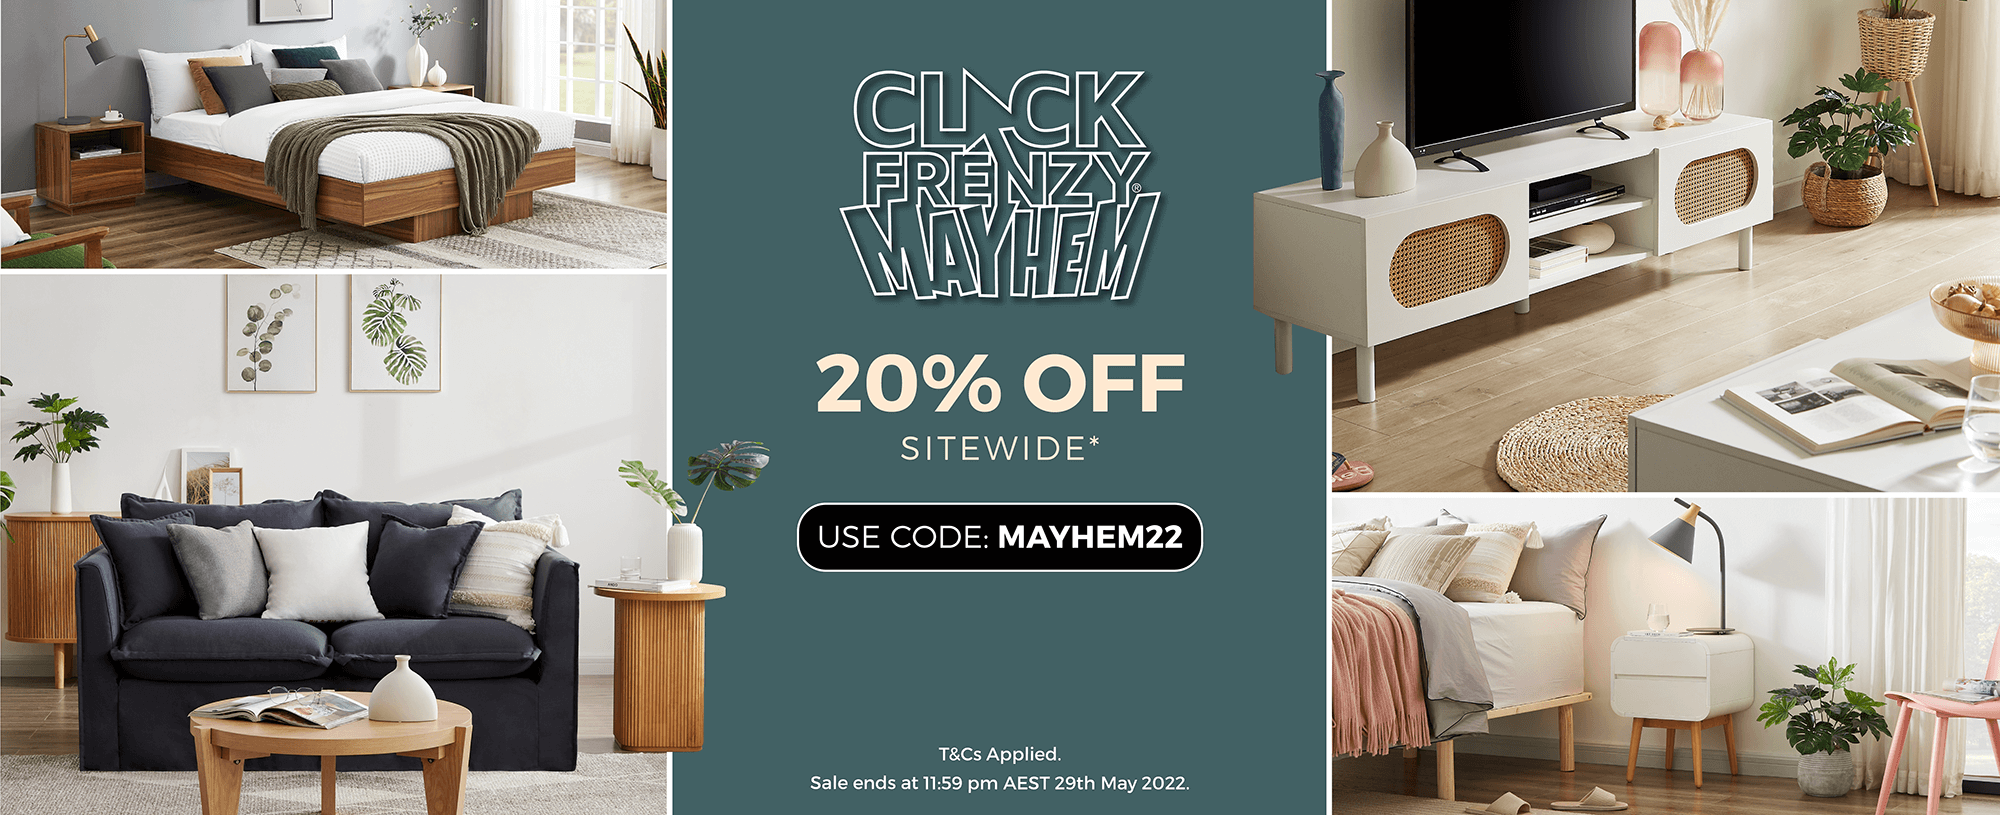 Eliving Furniture Click Frenzy Mayhem 20% OFF sitewide with coupon